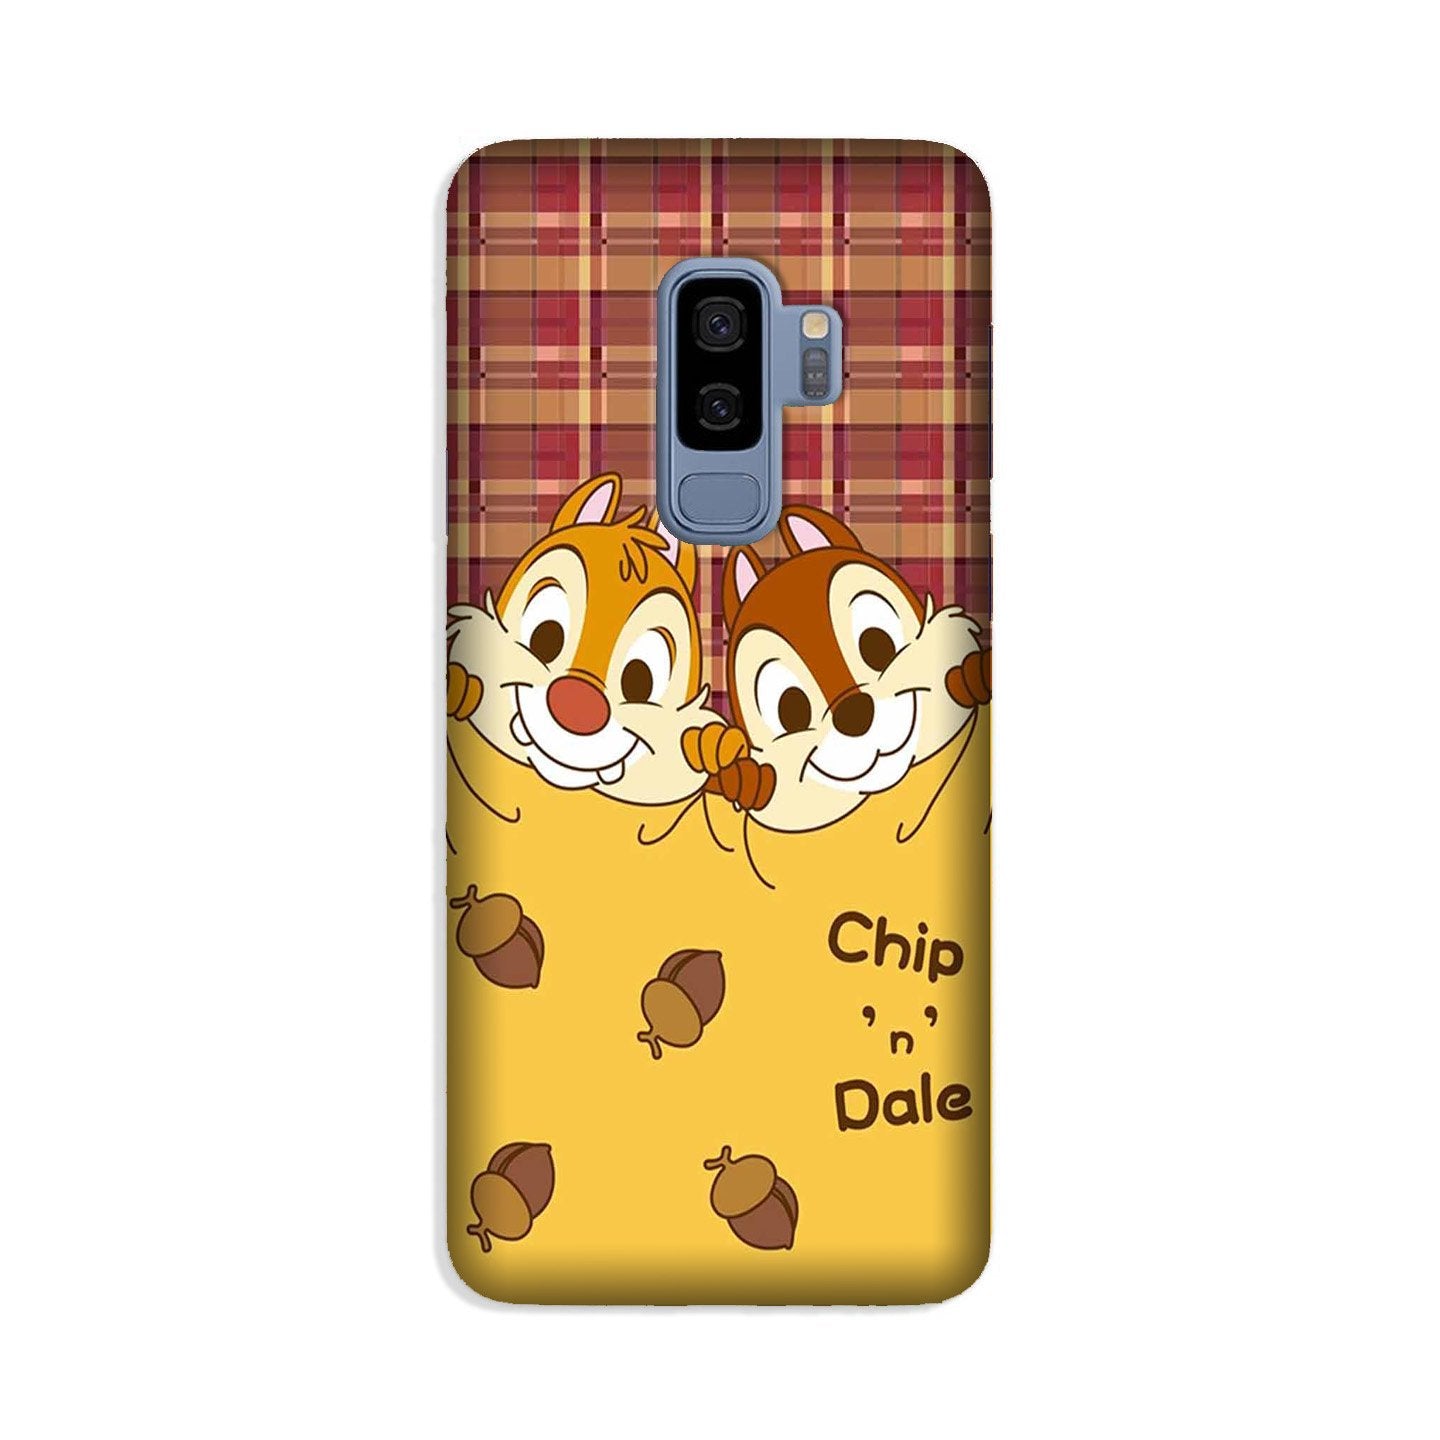 Chip n Dale Mobile Back Case for Galaxy S9 Plus  (Design - 342)